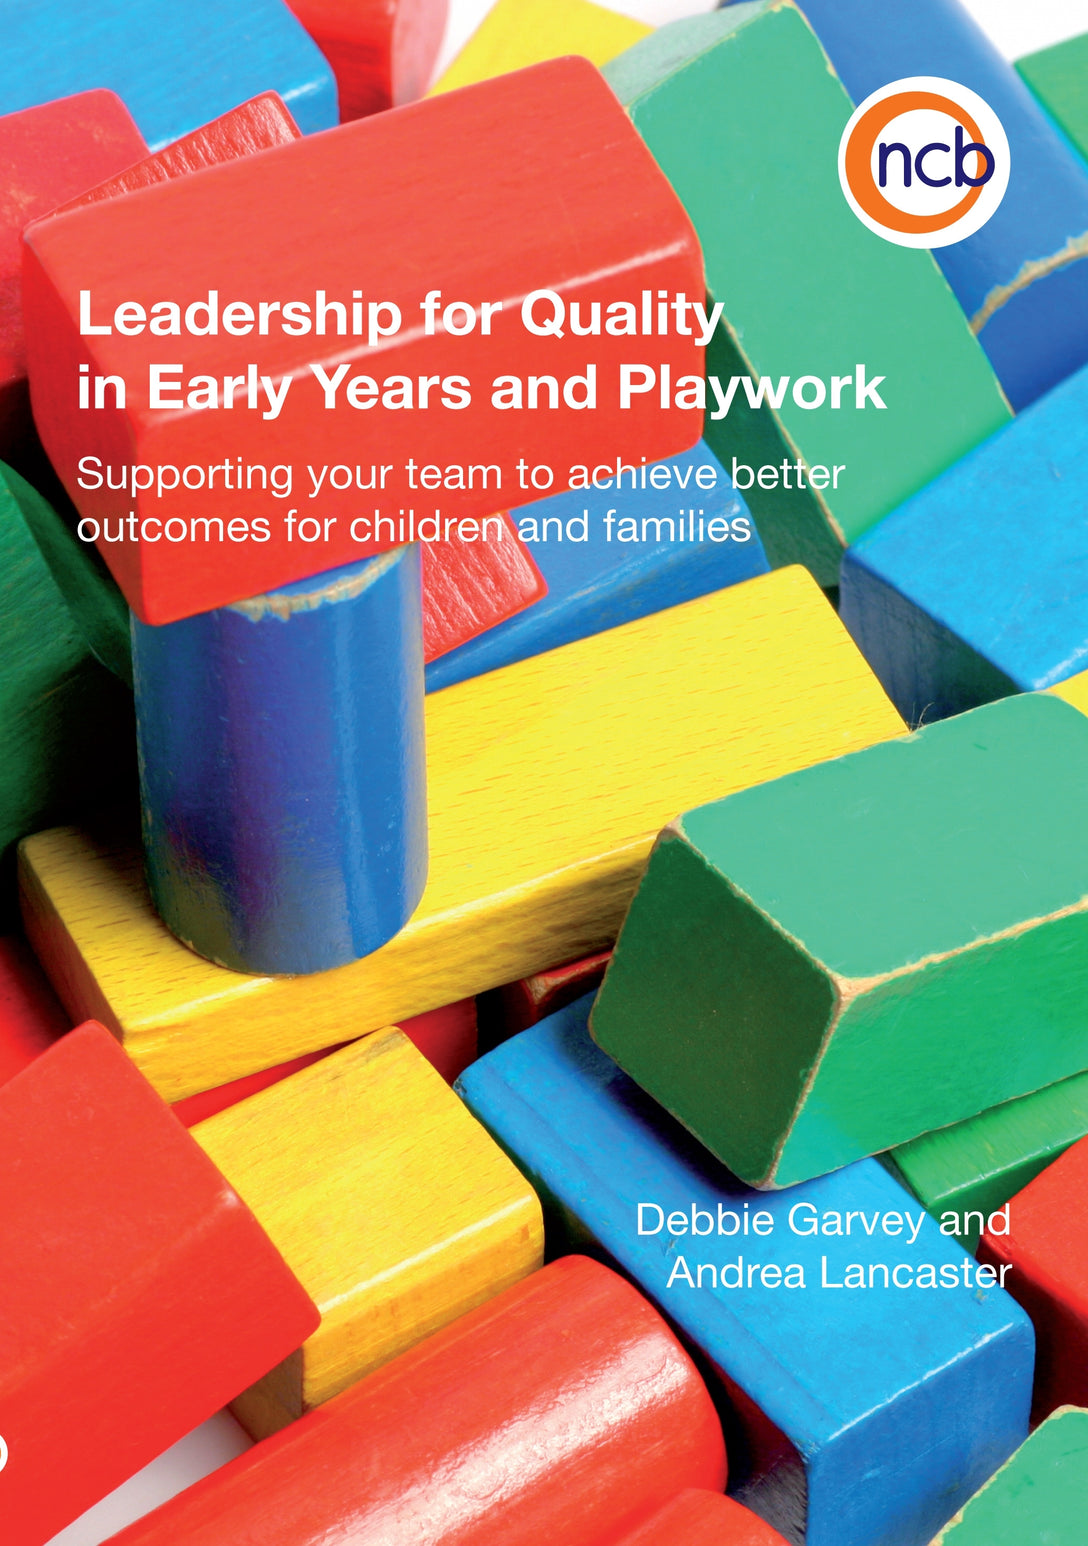 Leadership for Quality in Early Years and Playwork by Andrea Lancaster, Debbie Garvey